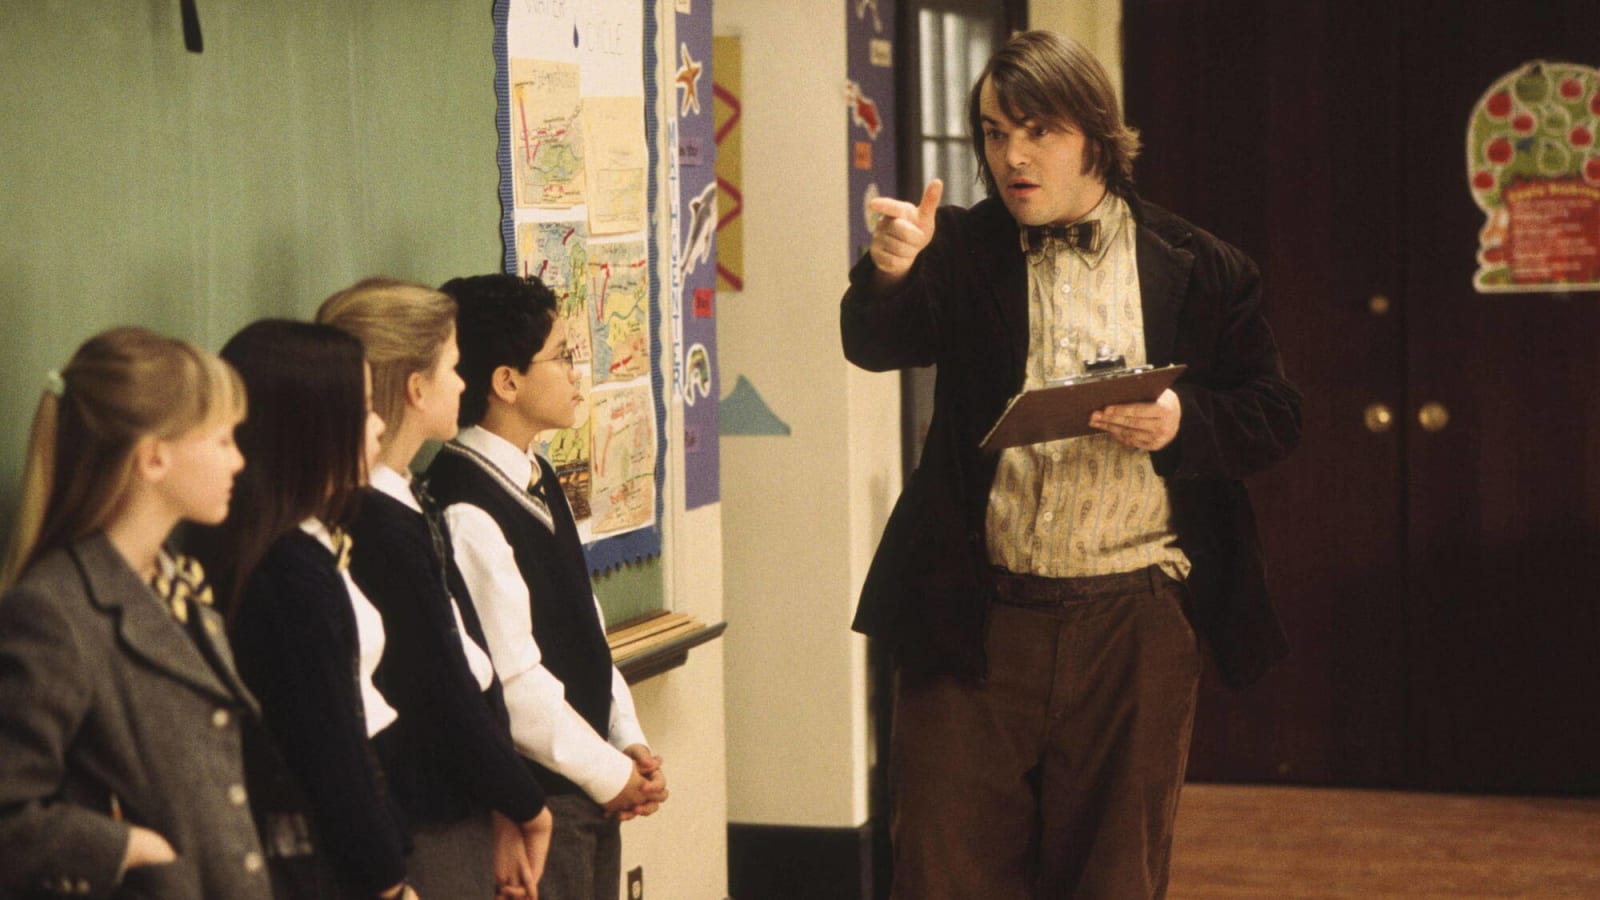 20 facts you might not know about 'School of Rock'